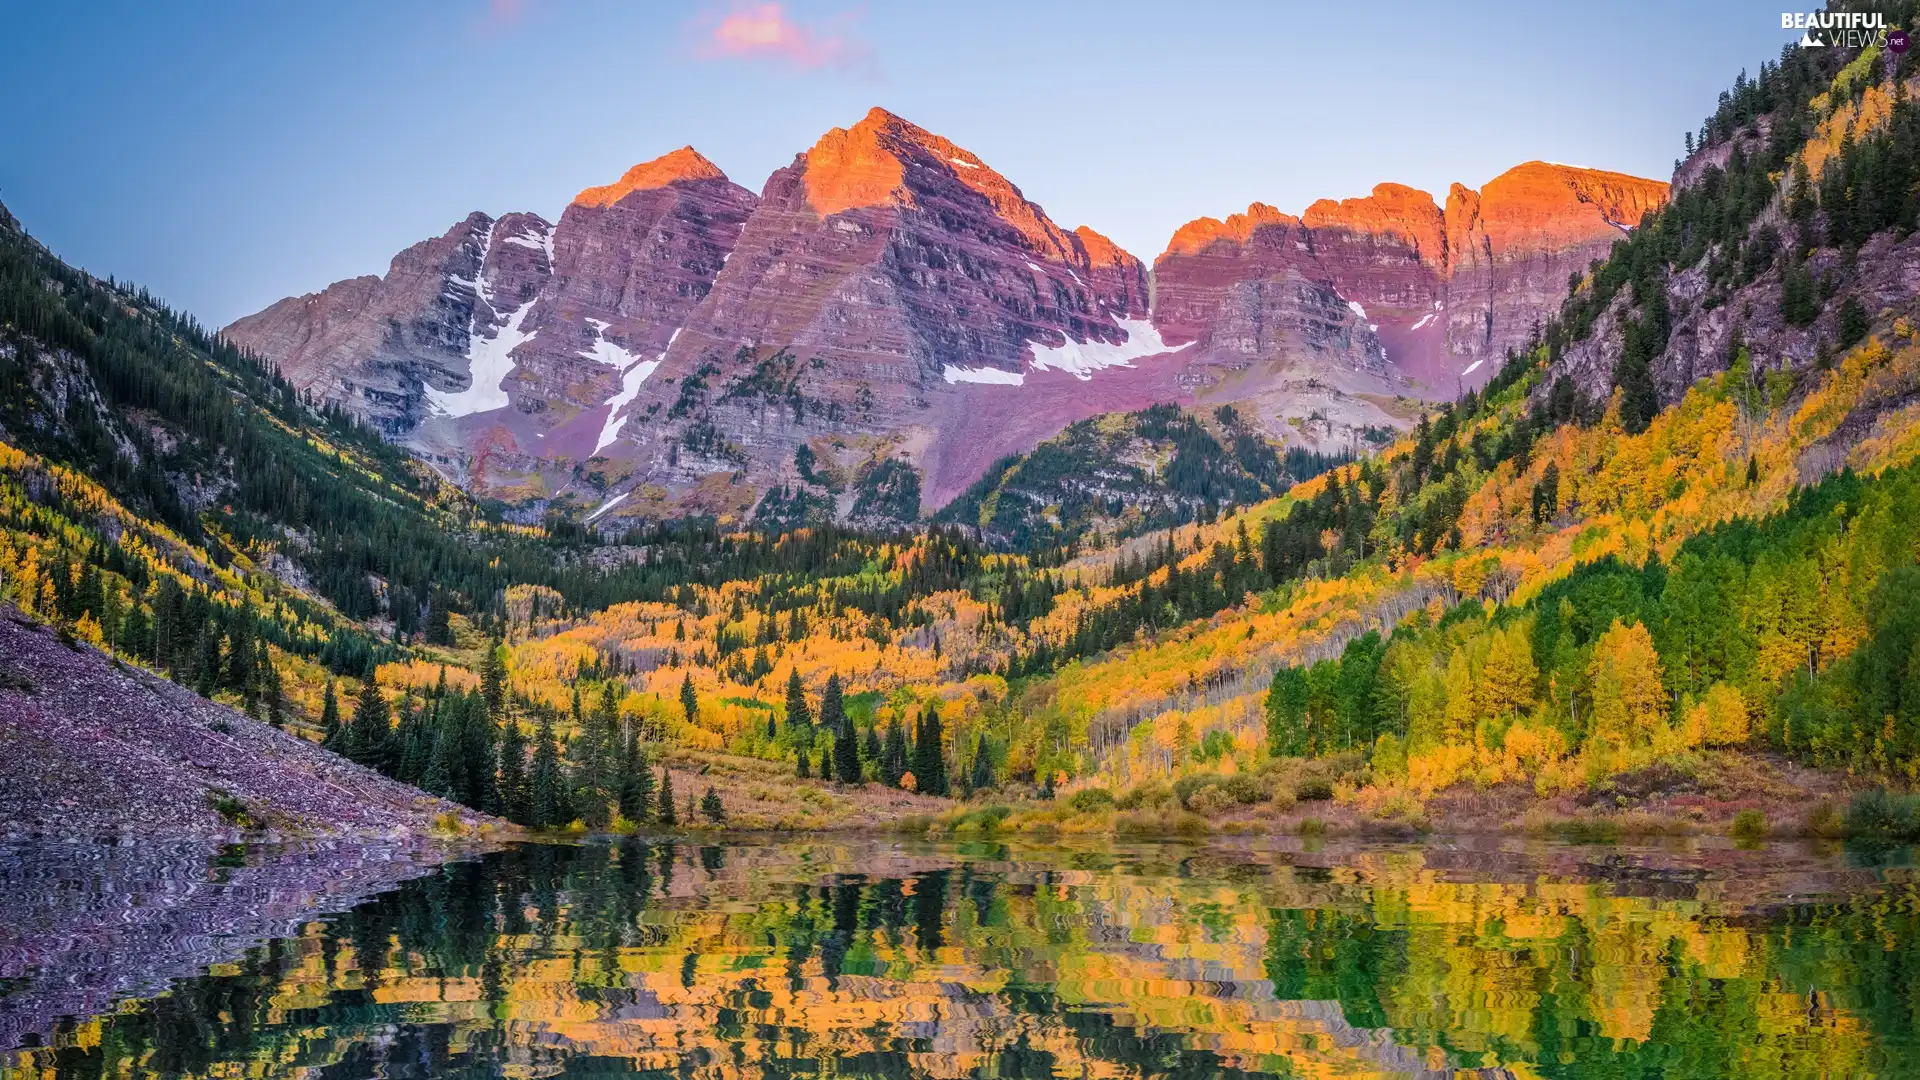 Maroon Lake, reflection, The United States, trees, State of Colorado, Maroon Bells Peaks, rocky mountains, viewes